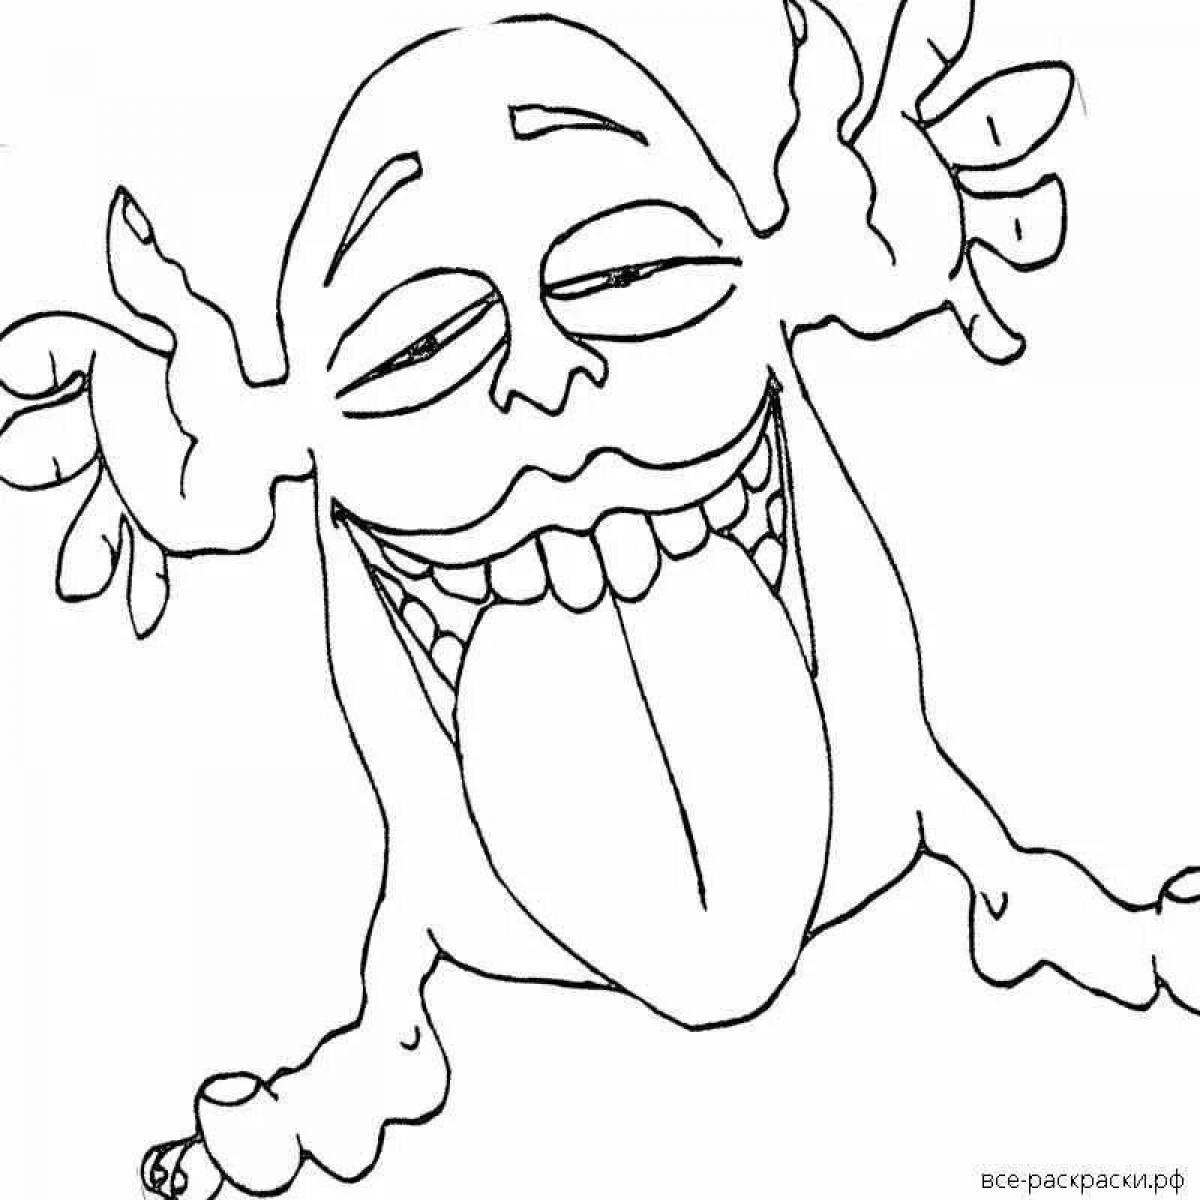 Coloring page shocking siren head monster